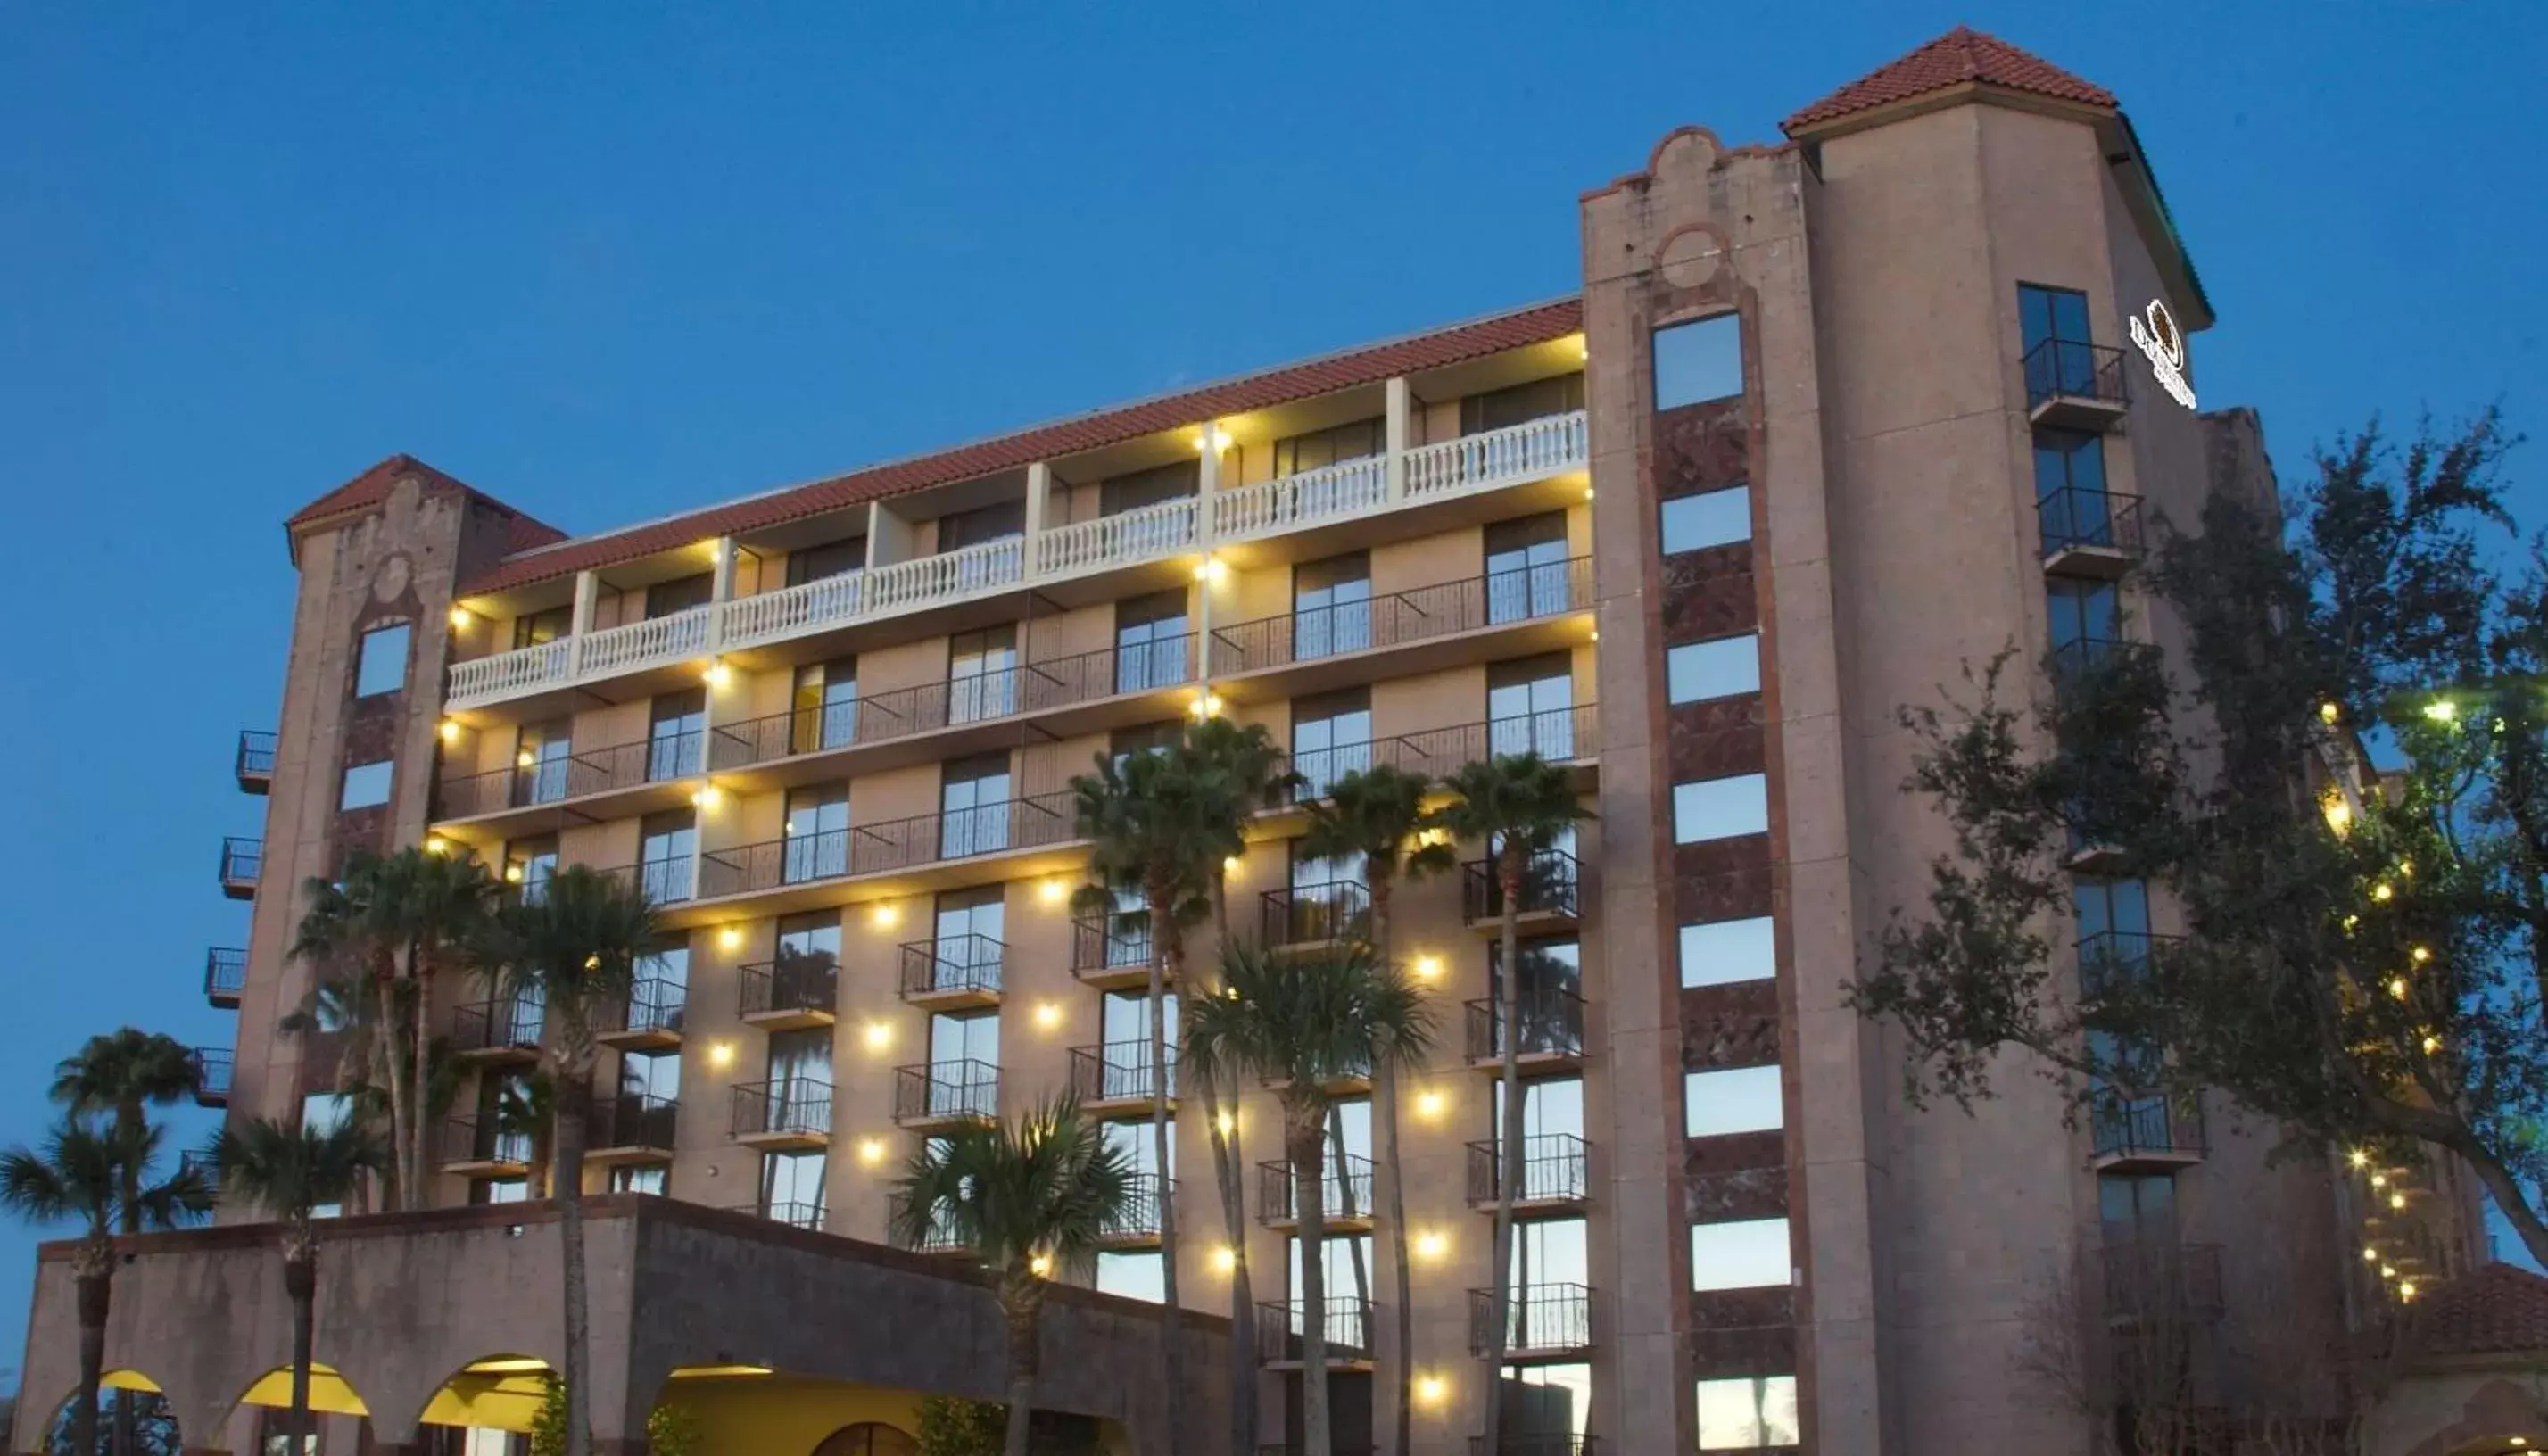 Property Building in Doubletree by Hilton McAllen